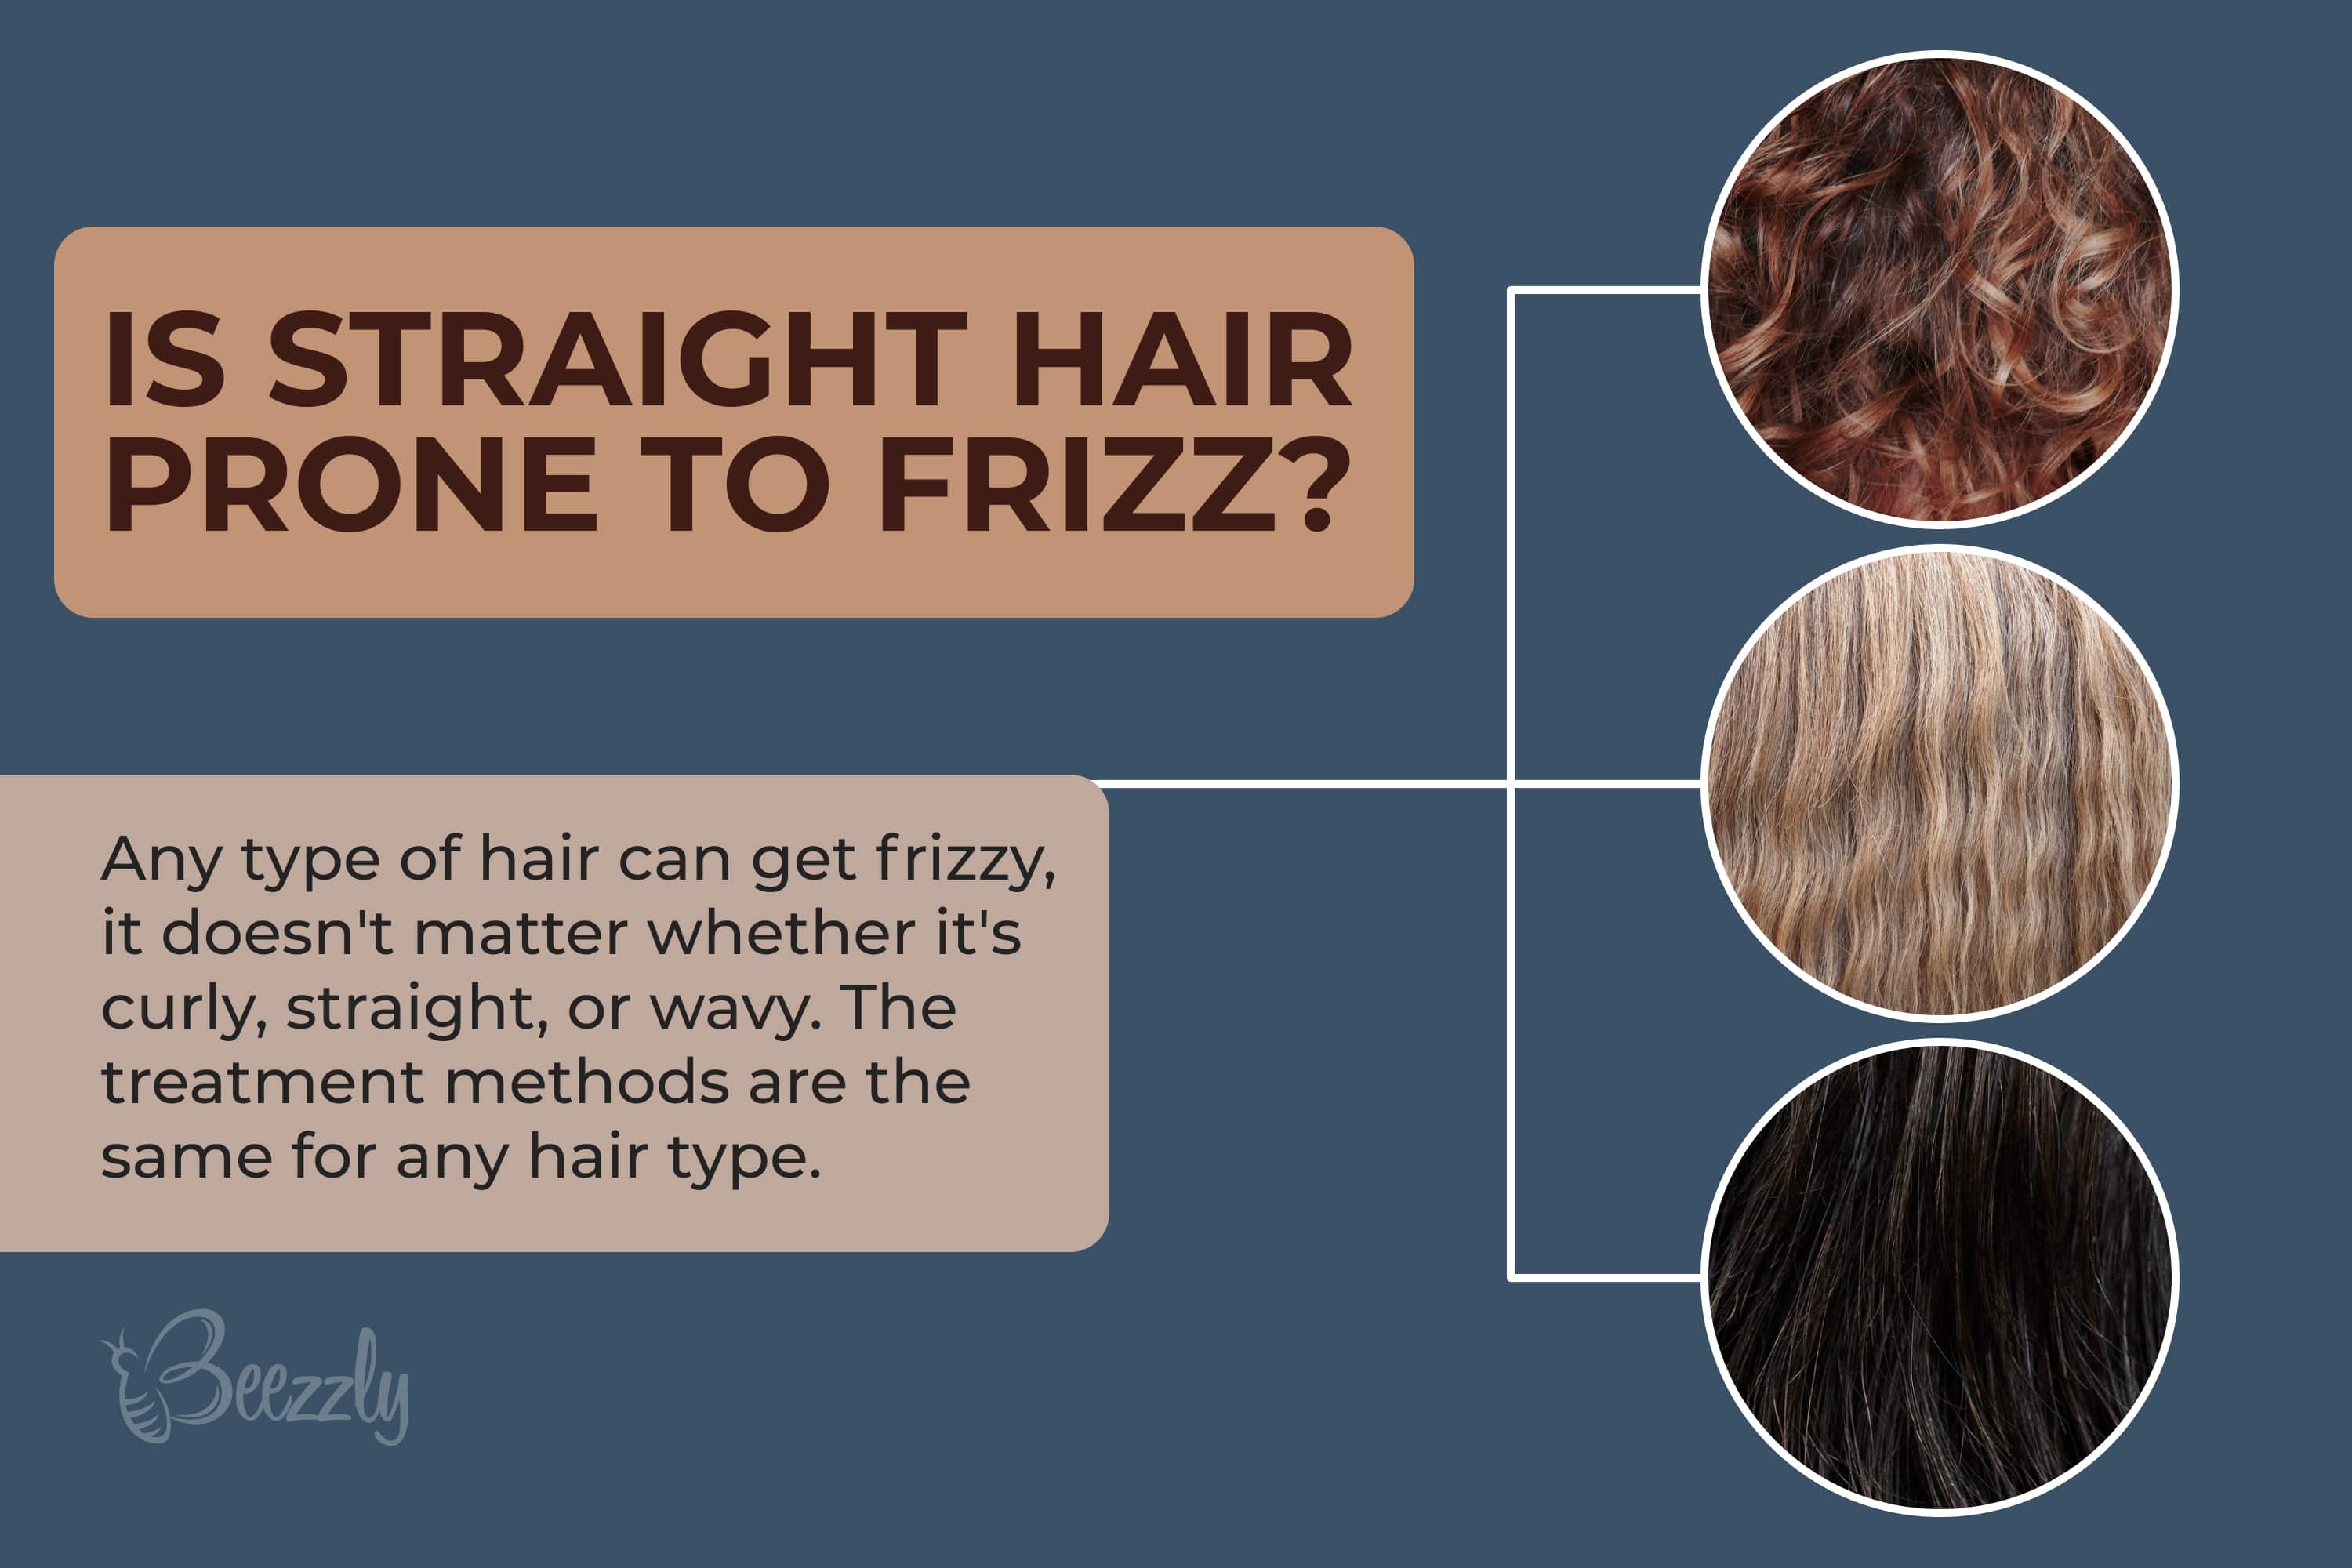 Is straight hair prone to frizz